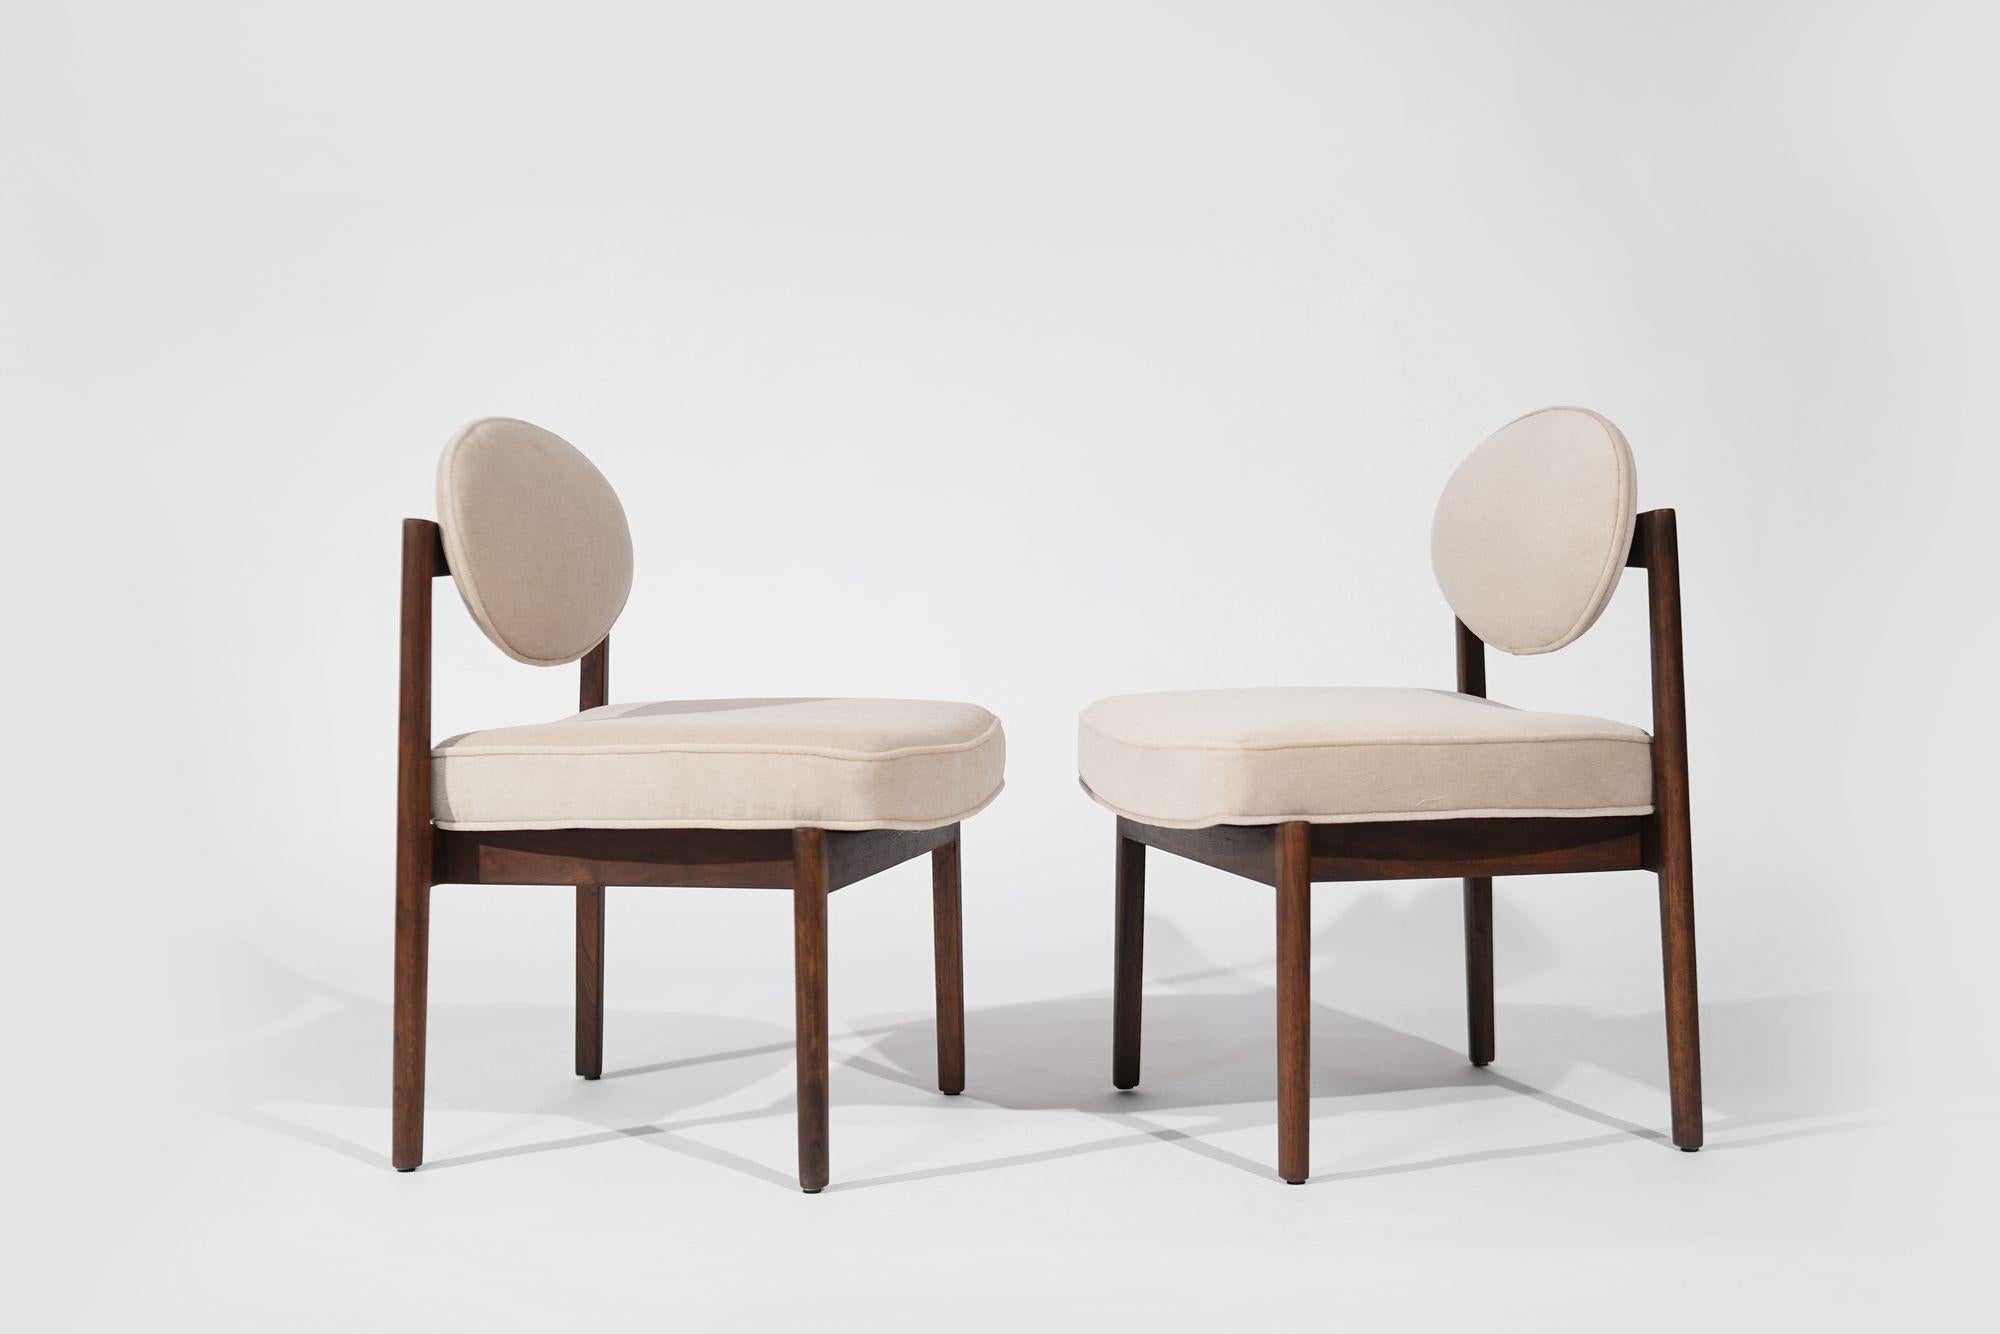 American Set of Walnut Side Chairs by Jens Risom in Natural Mohair, C. 1950s For Sale